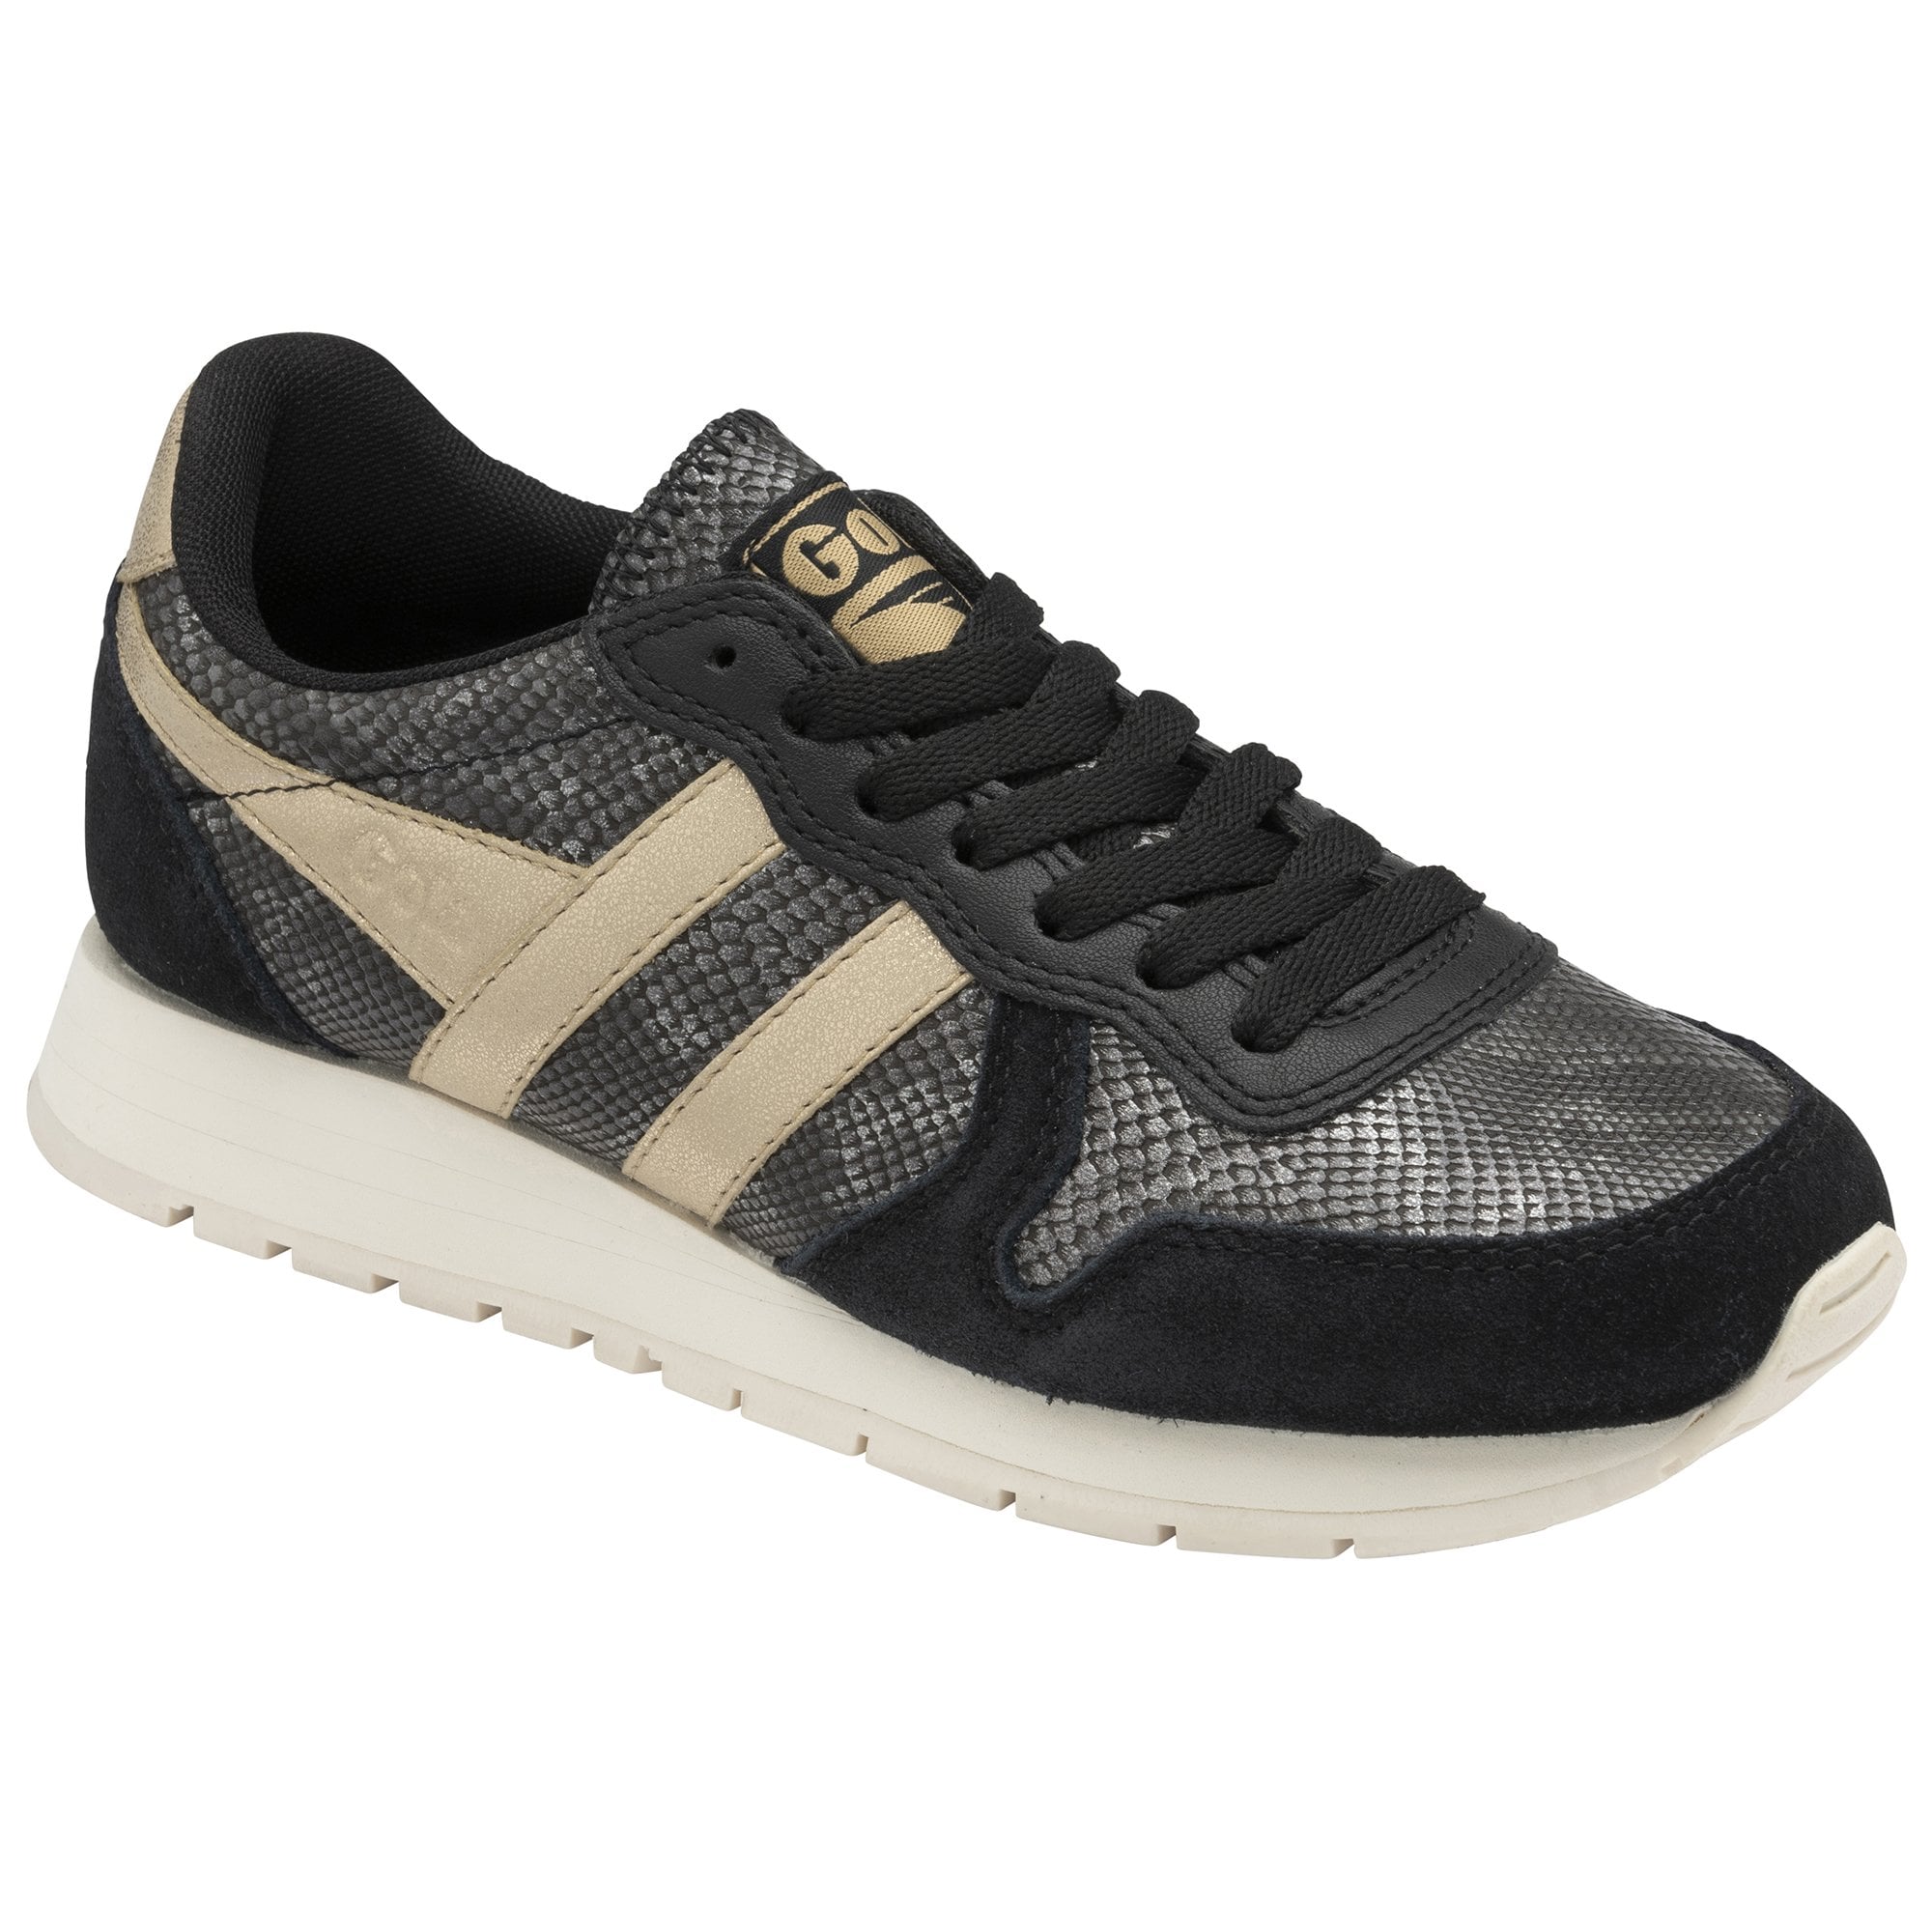 Gola Daytona Lizard Ladies Black And Gold Lace Up Trainers